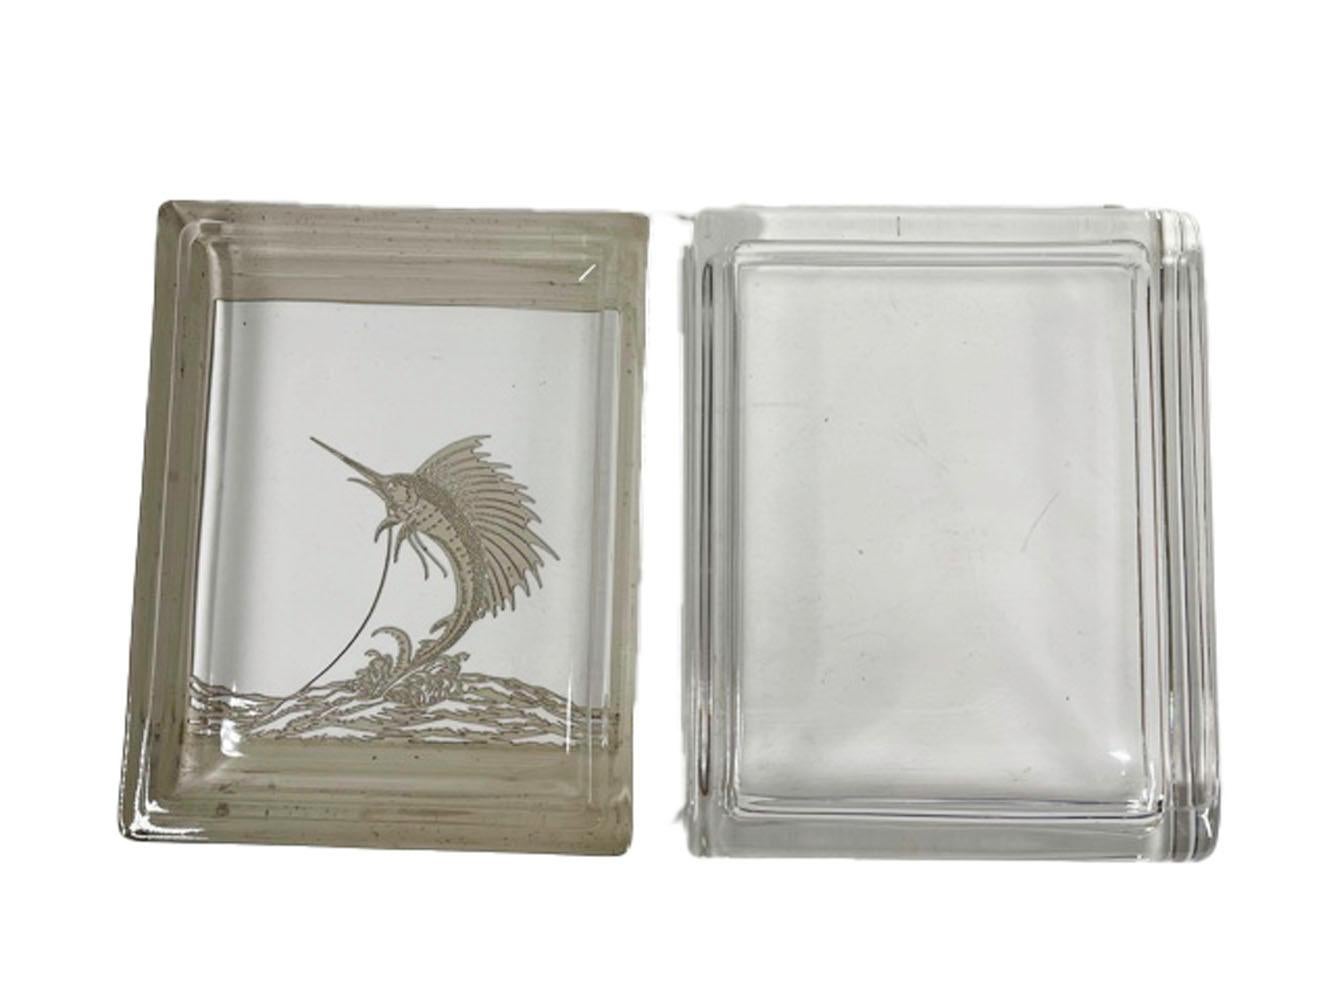 American Vintage Glass Cigarette or Dresser Box with Silver Overlay Sailfish Decoration